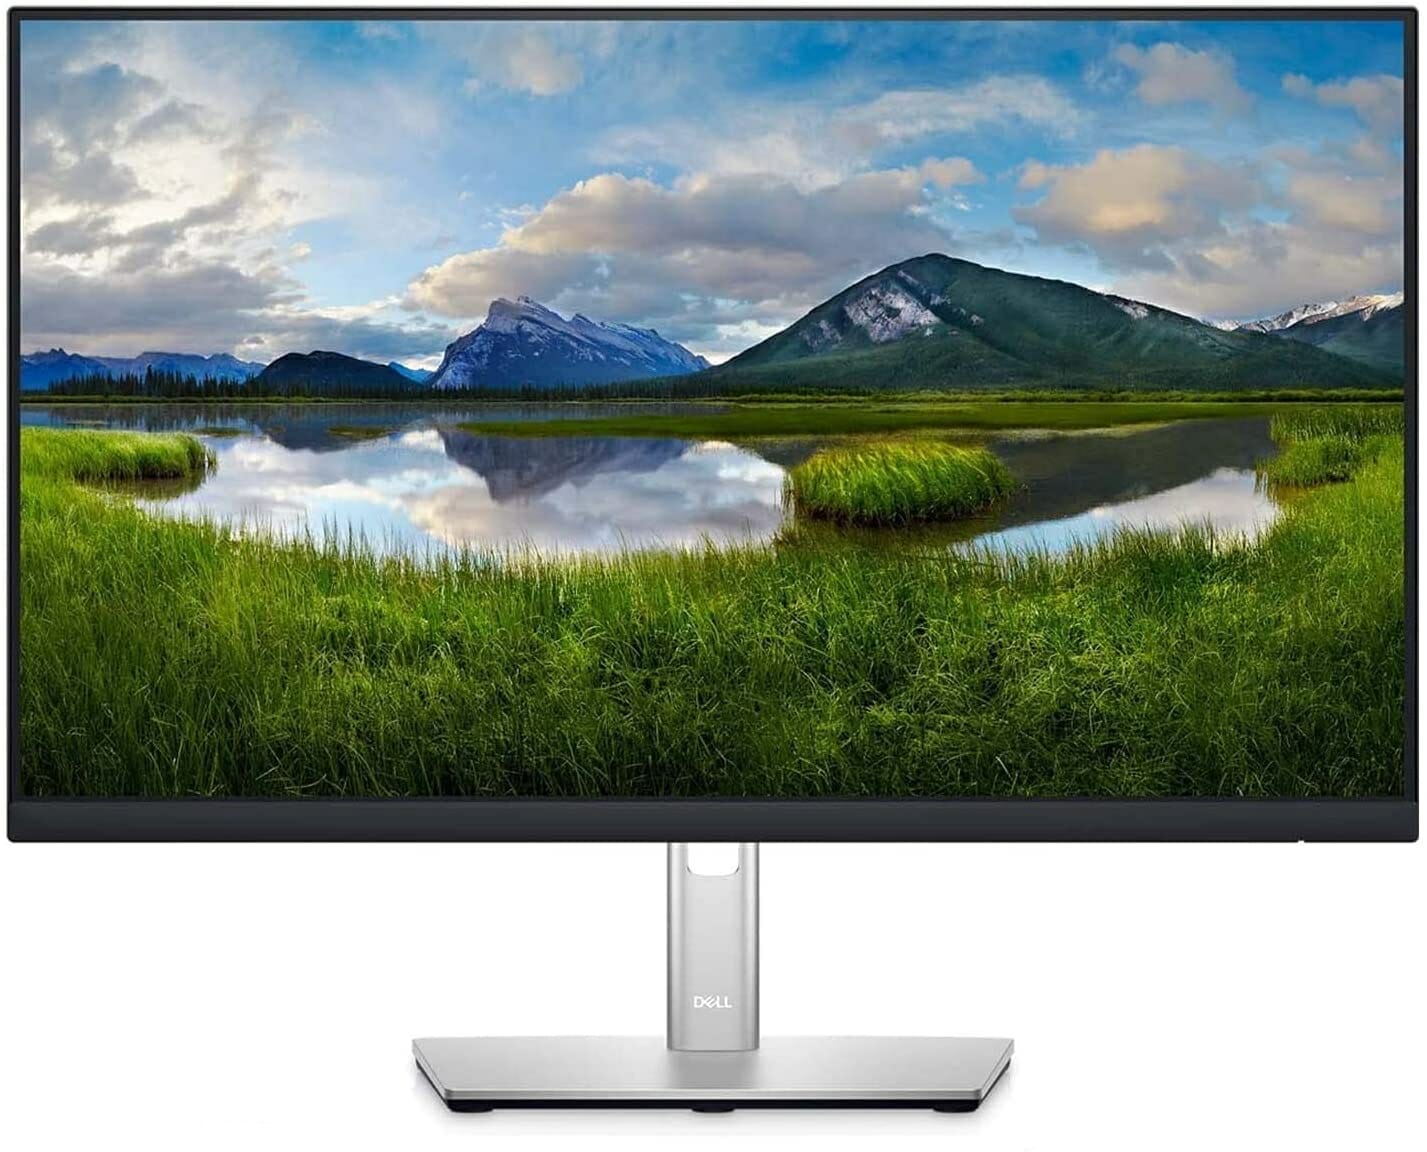  Dell P2722H 27" 16:9 IPS Computer Monitor